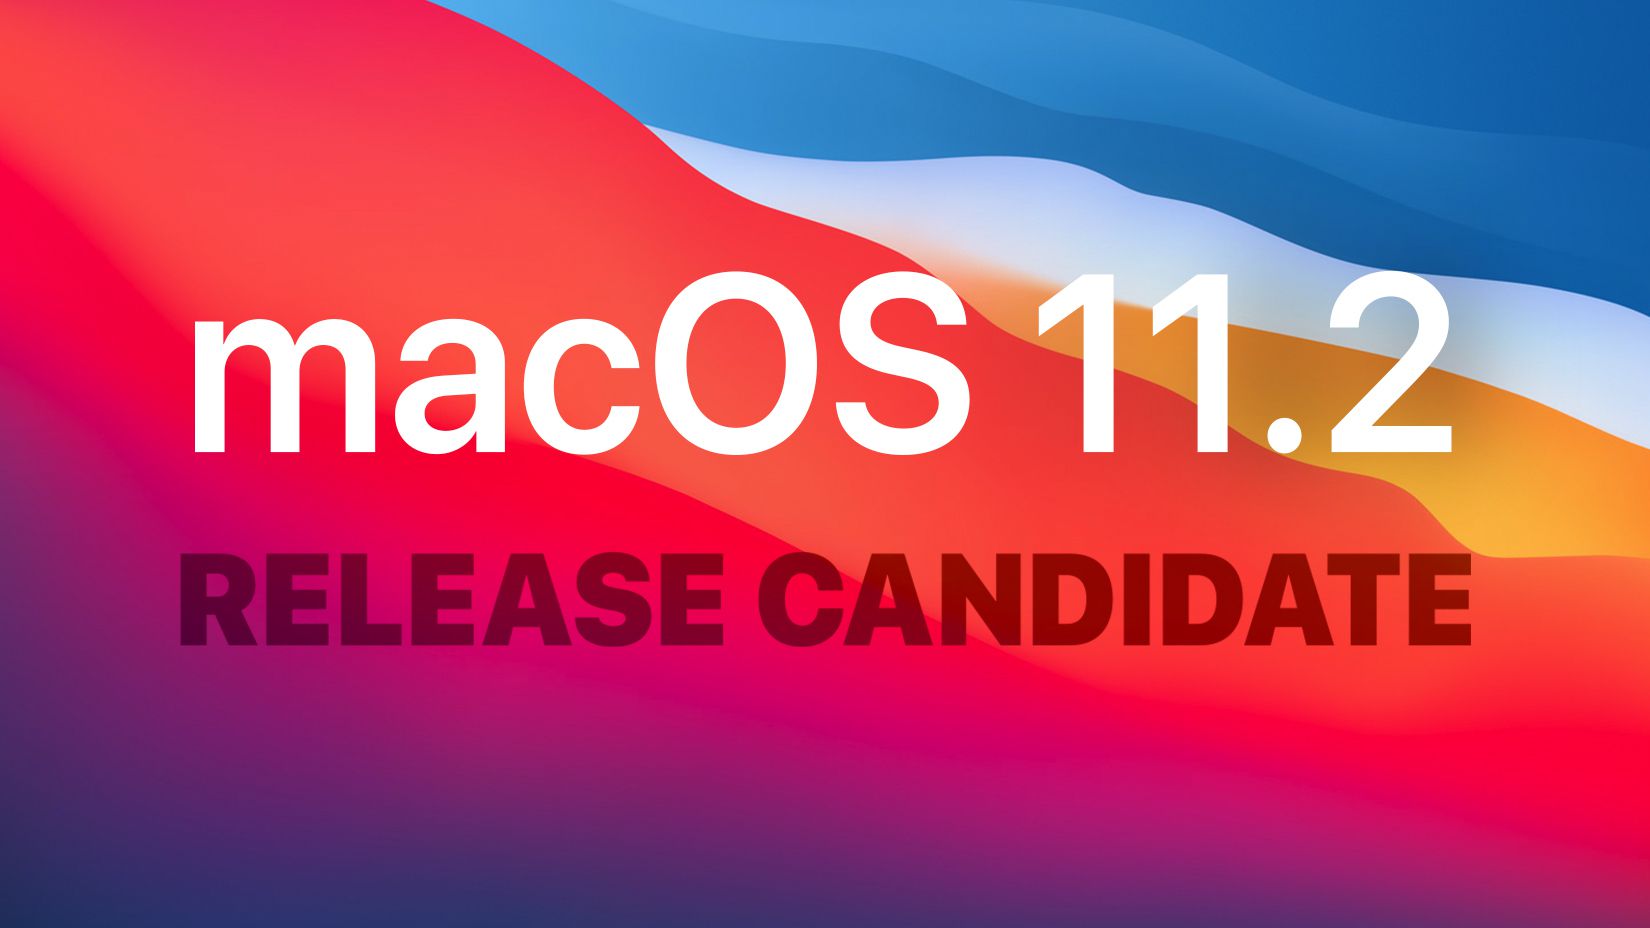 Apple Seeds Releases Candidate Version of macOS Big Sur 11.2 to Developers and Public Beta Testers